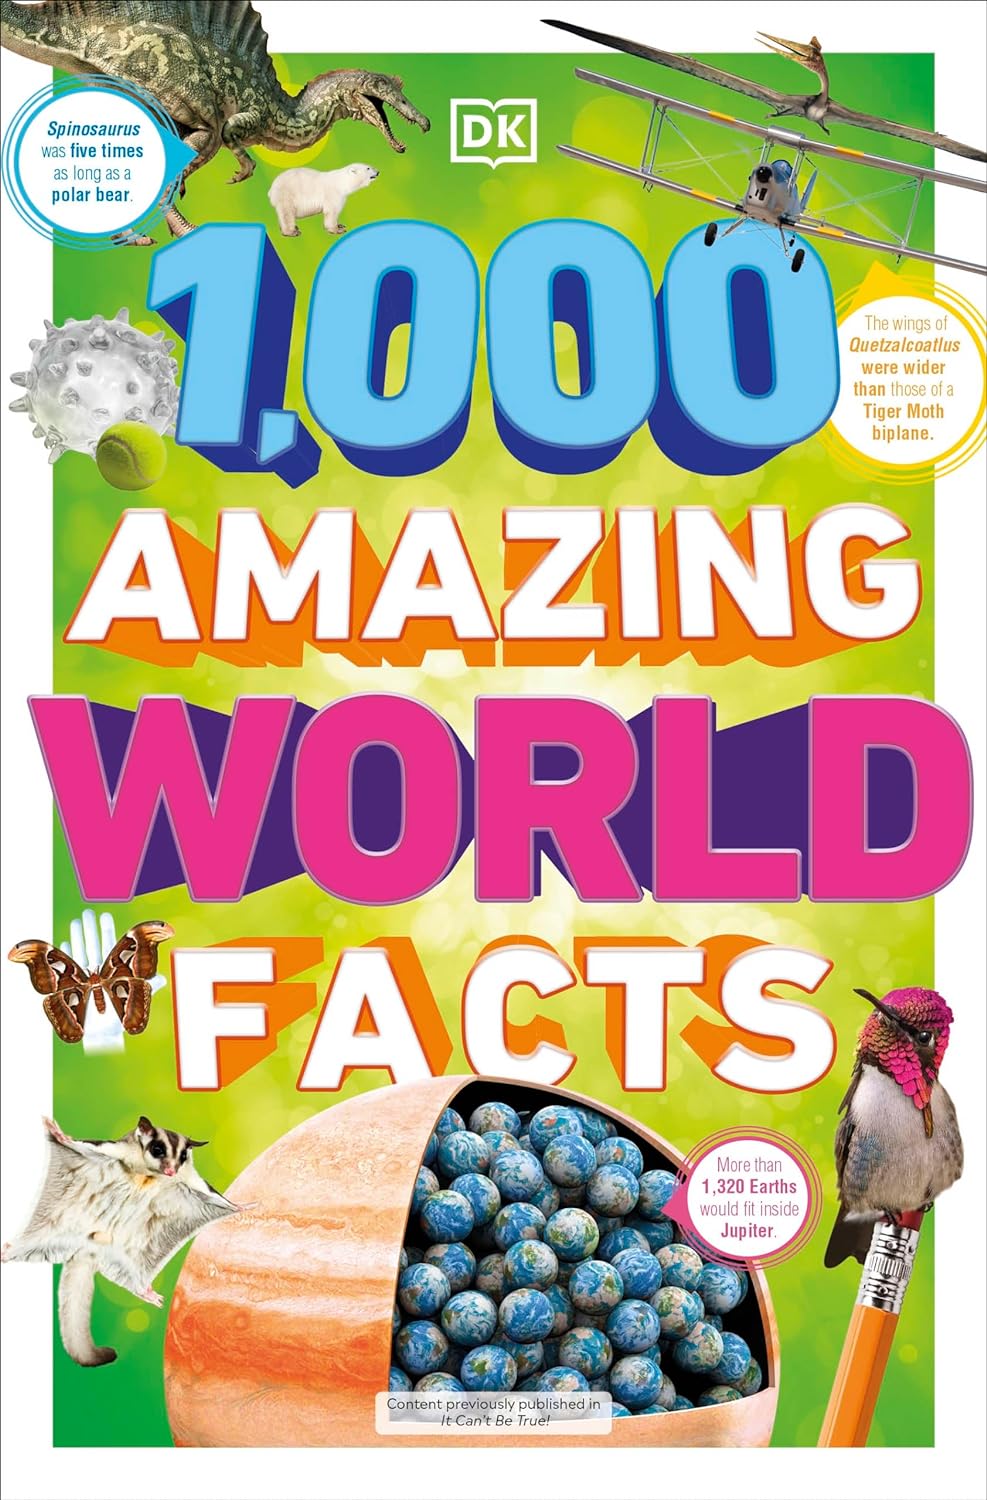 1,000 Amazing World Facts (DK 1,000 Amazing Facts)  - CA Corrections Bookstore